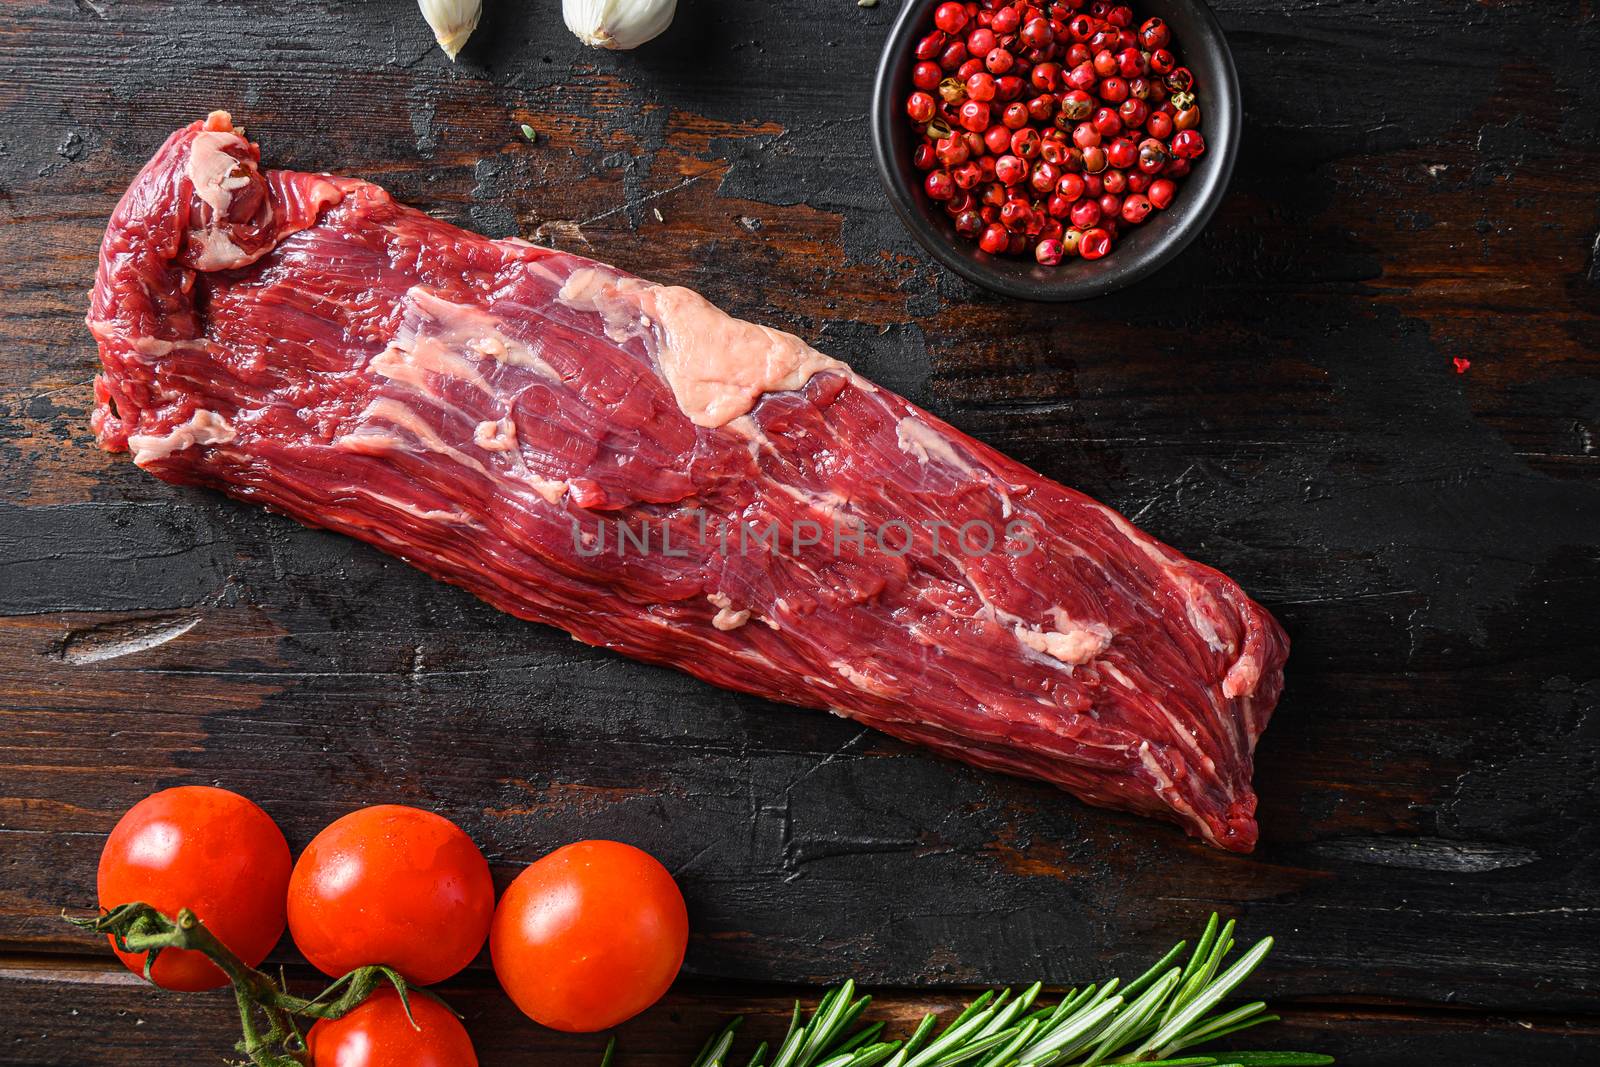 Machete steak raw alternative beef cut or hanging tende cut, with rosemary over wood background Top side view by Ilianesolenyi